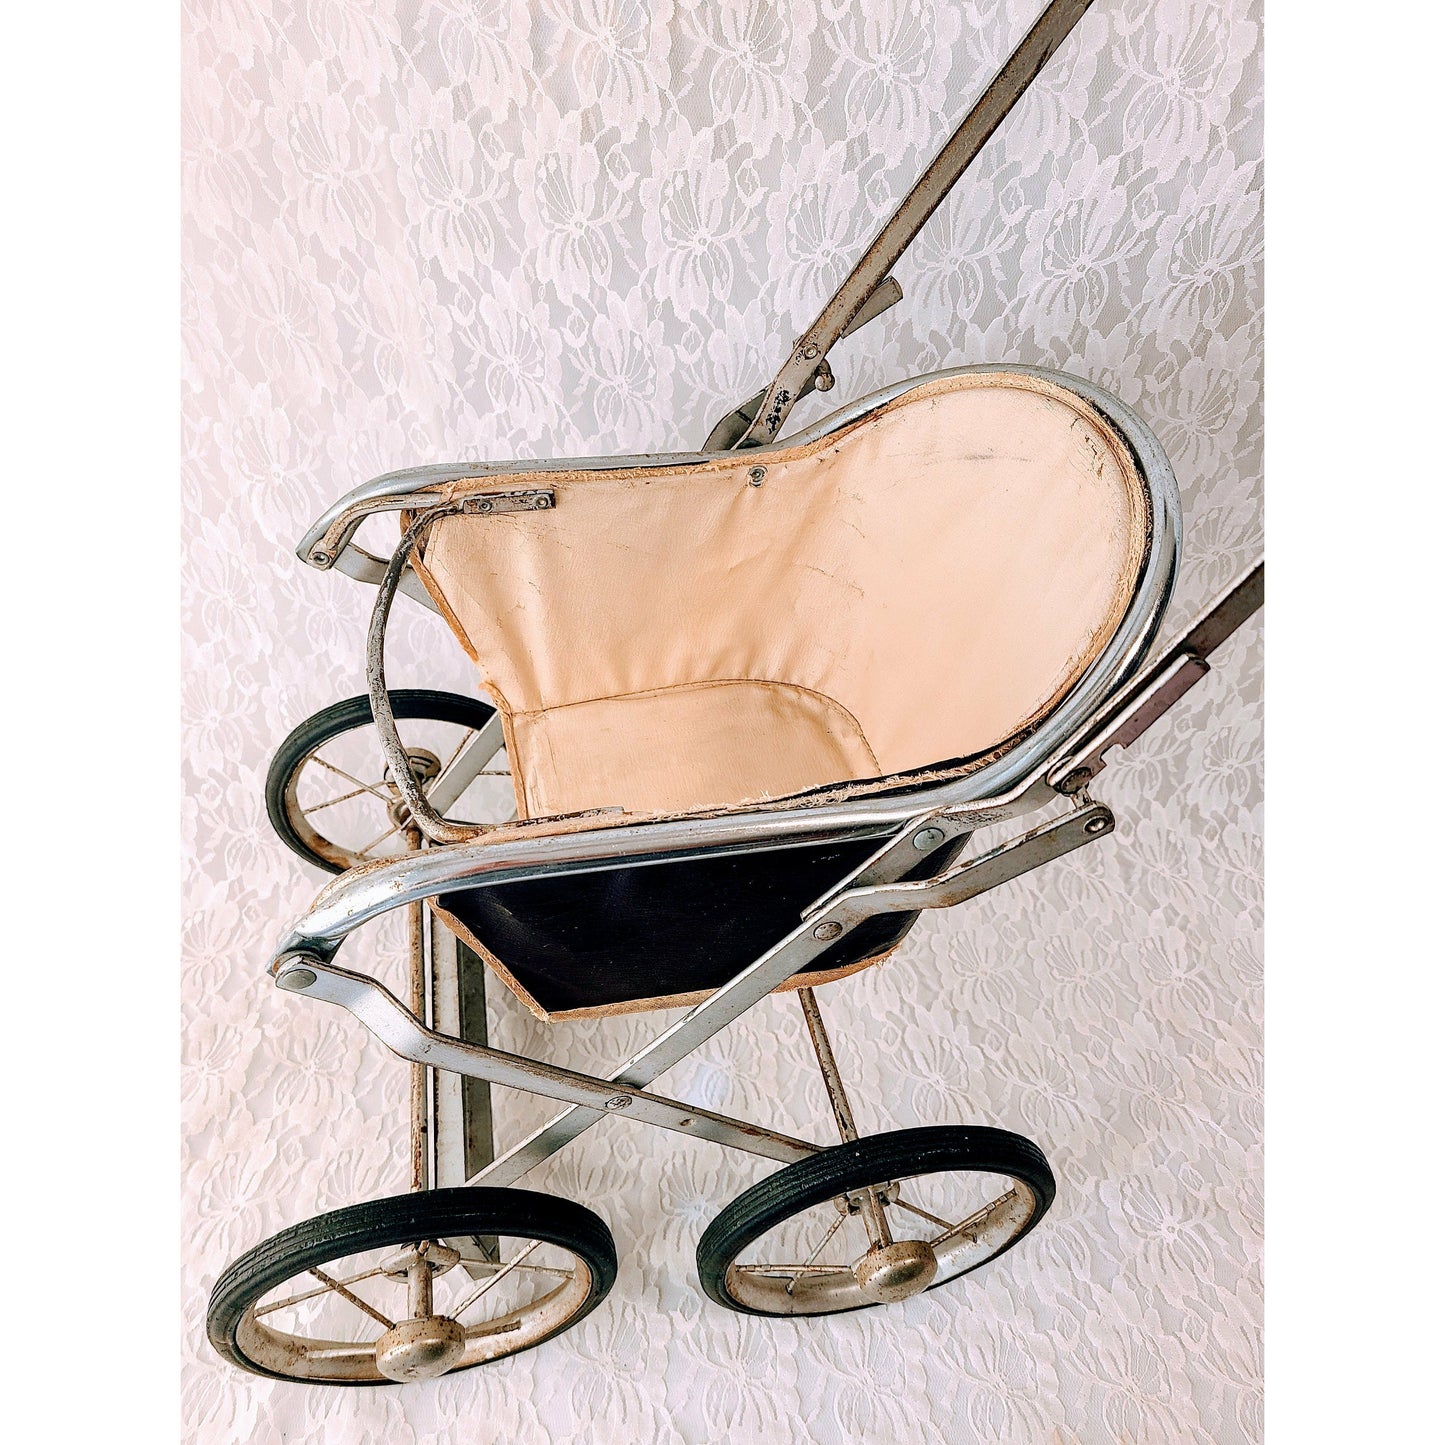 Reserved Jessica 10/17 Large Antique 1950s Metal Doll Stroller Carriage Pram ~ Foldable Frame 25" for Composition, French German, or Porcelain Doll Display